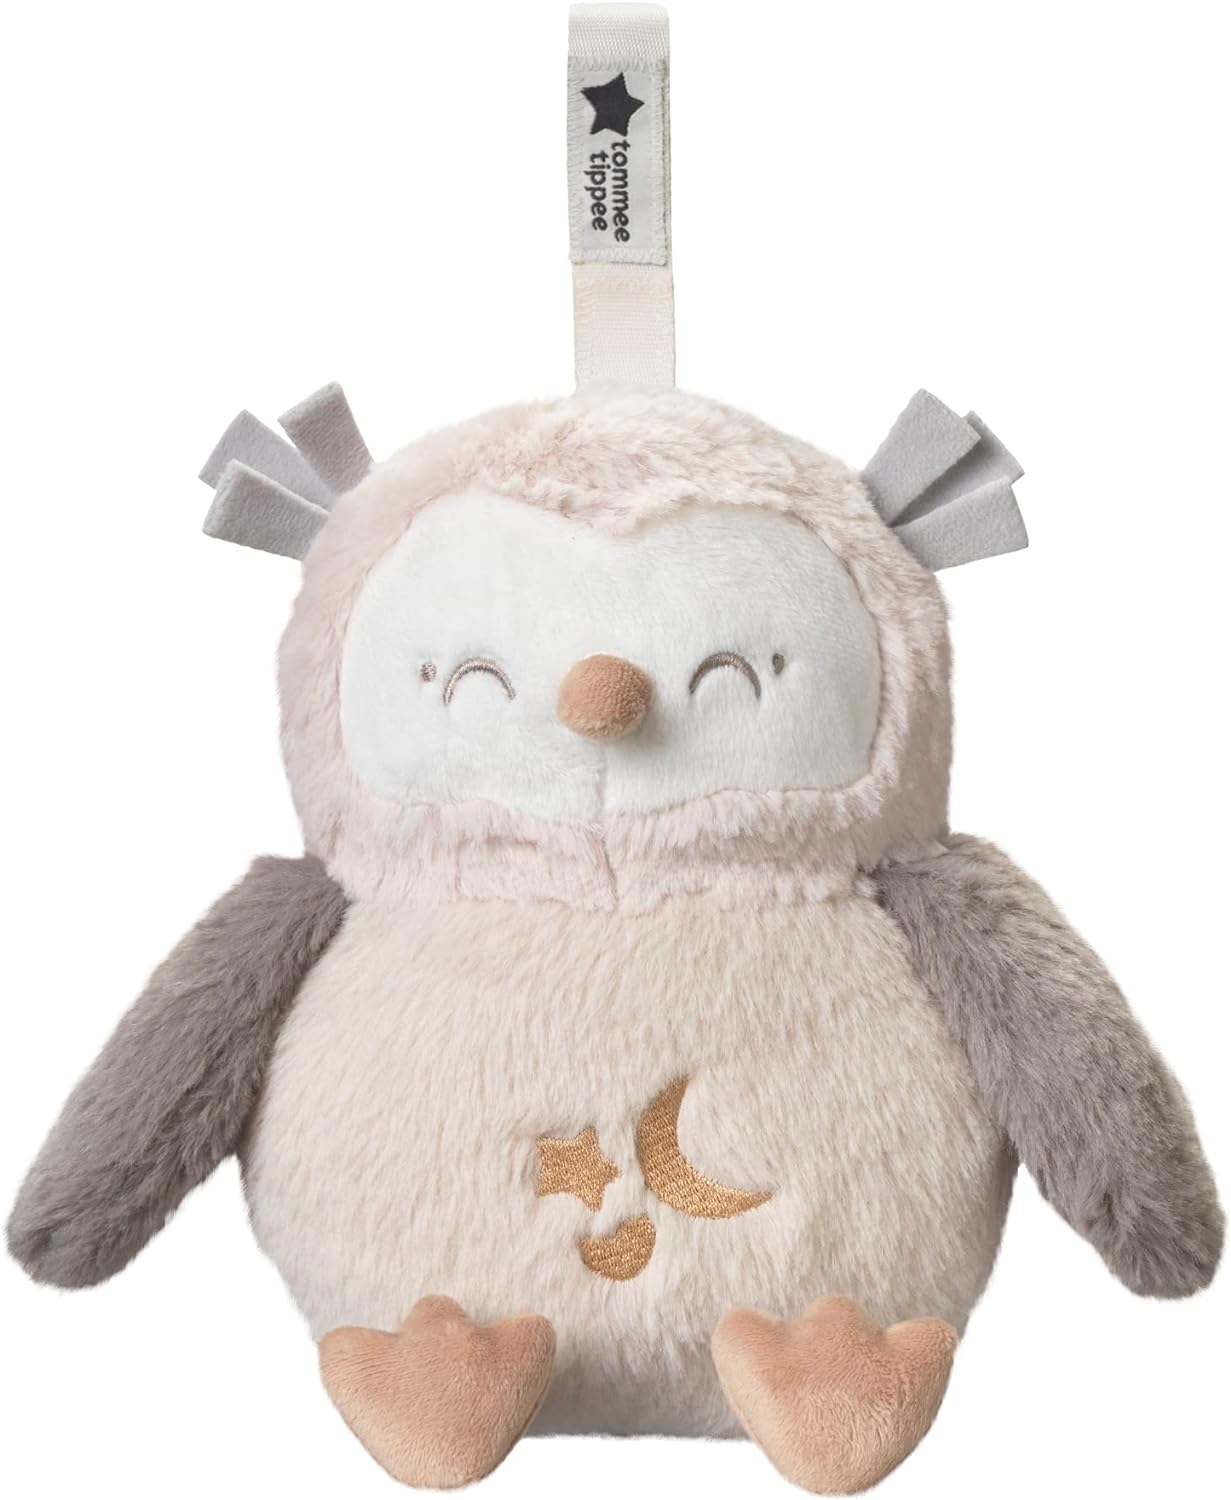 Tommee Tippee Deluxe Baby and Toddler Sound and Light Sleep Aid with CrySensor, 6 Soothing Sounds and Nightlight, USB-Rechargeable and Machine Washable, Ollie The Owl